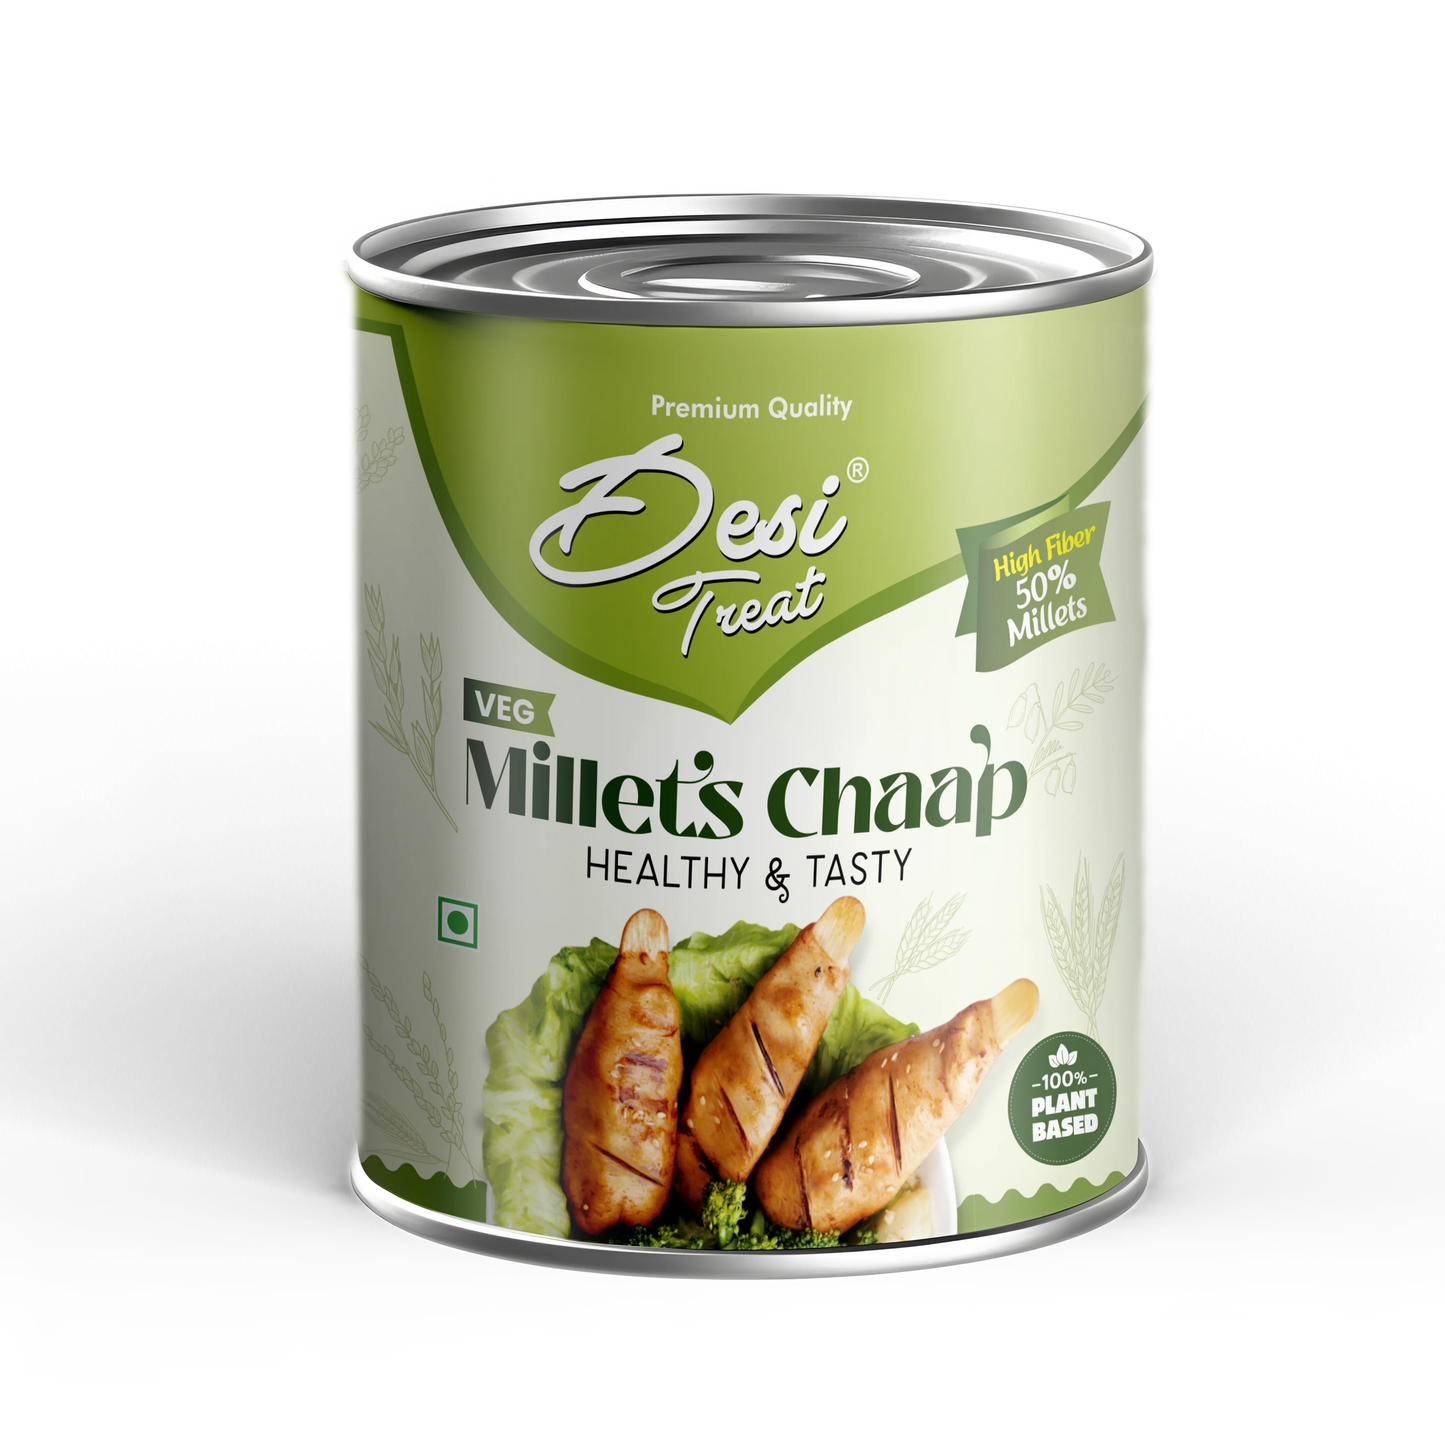 Desi treat Veg Millets Chaap with brine, 800gm (Drained weight 500gm)